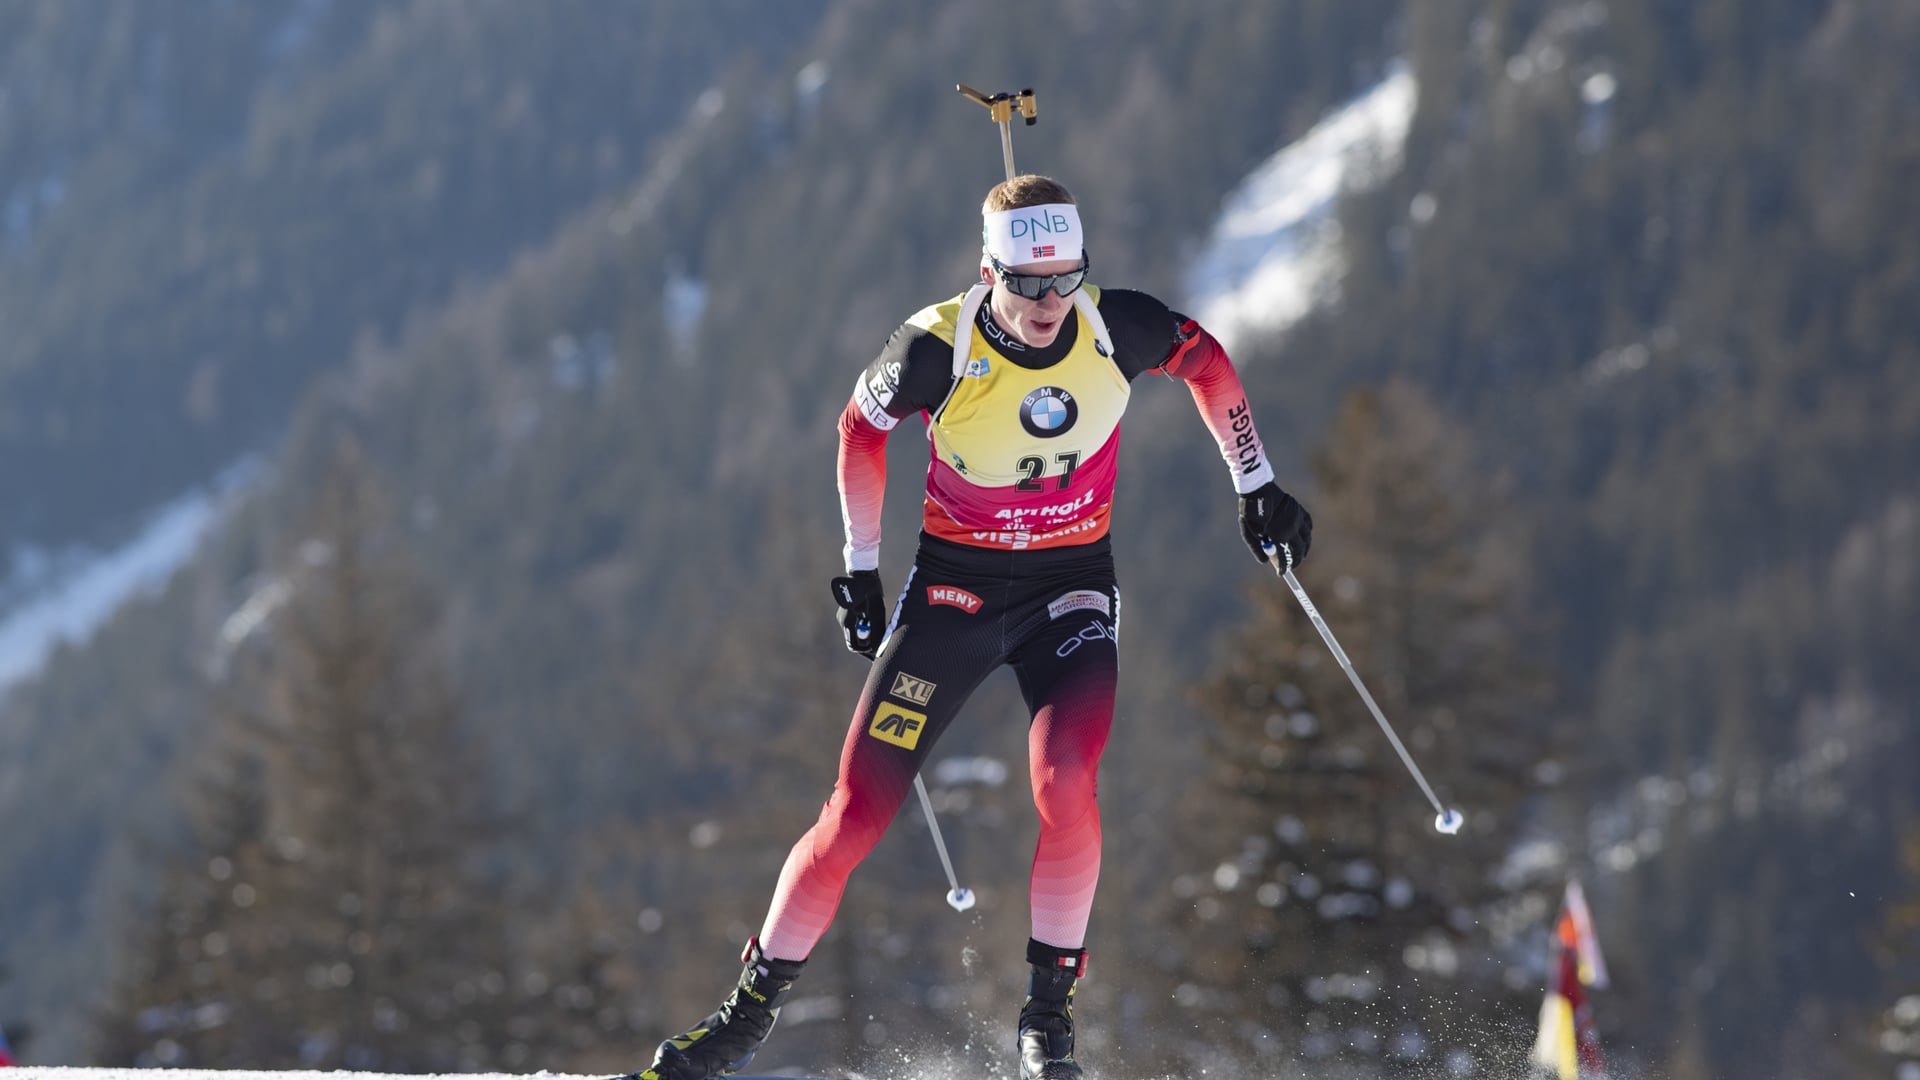 25.01.2019 - Johannes Thingnes Bø is unbeatable in the Anterselva sprint